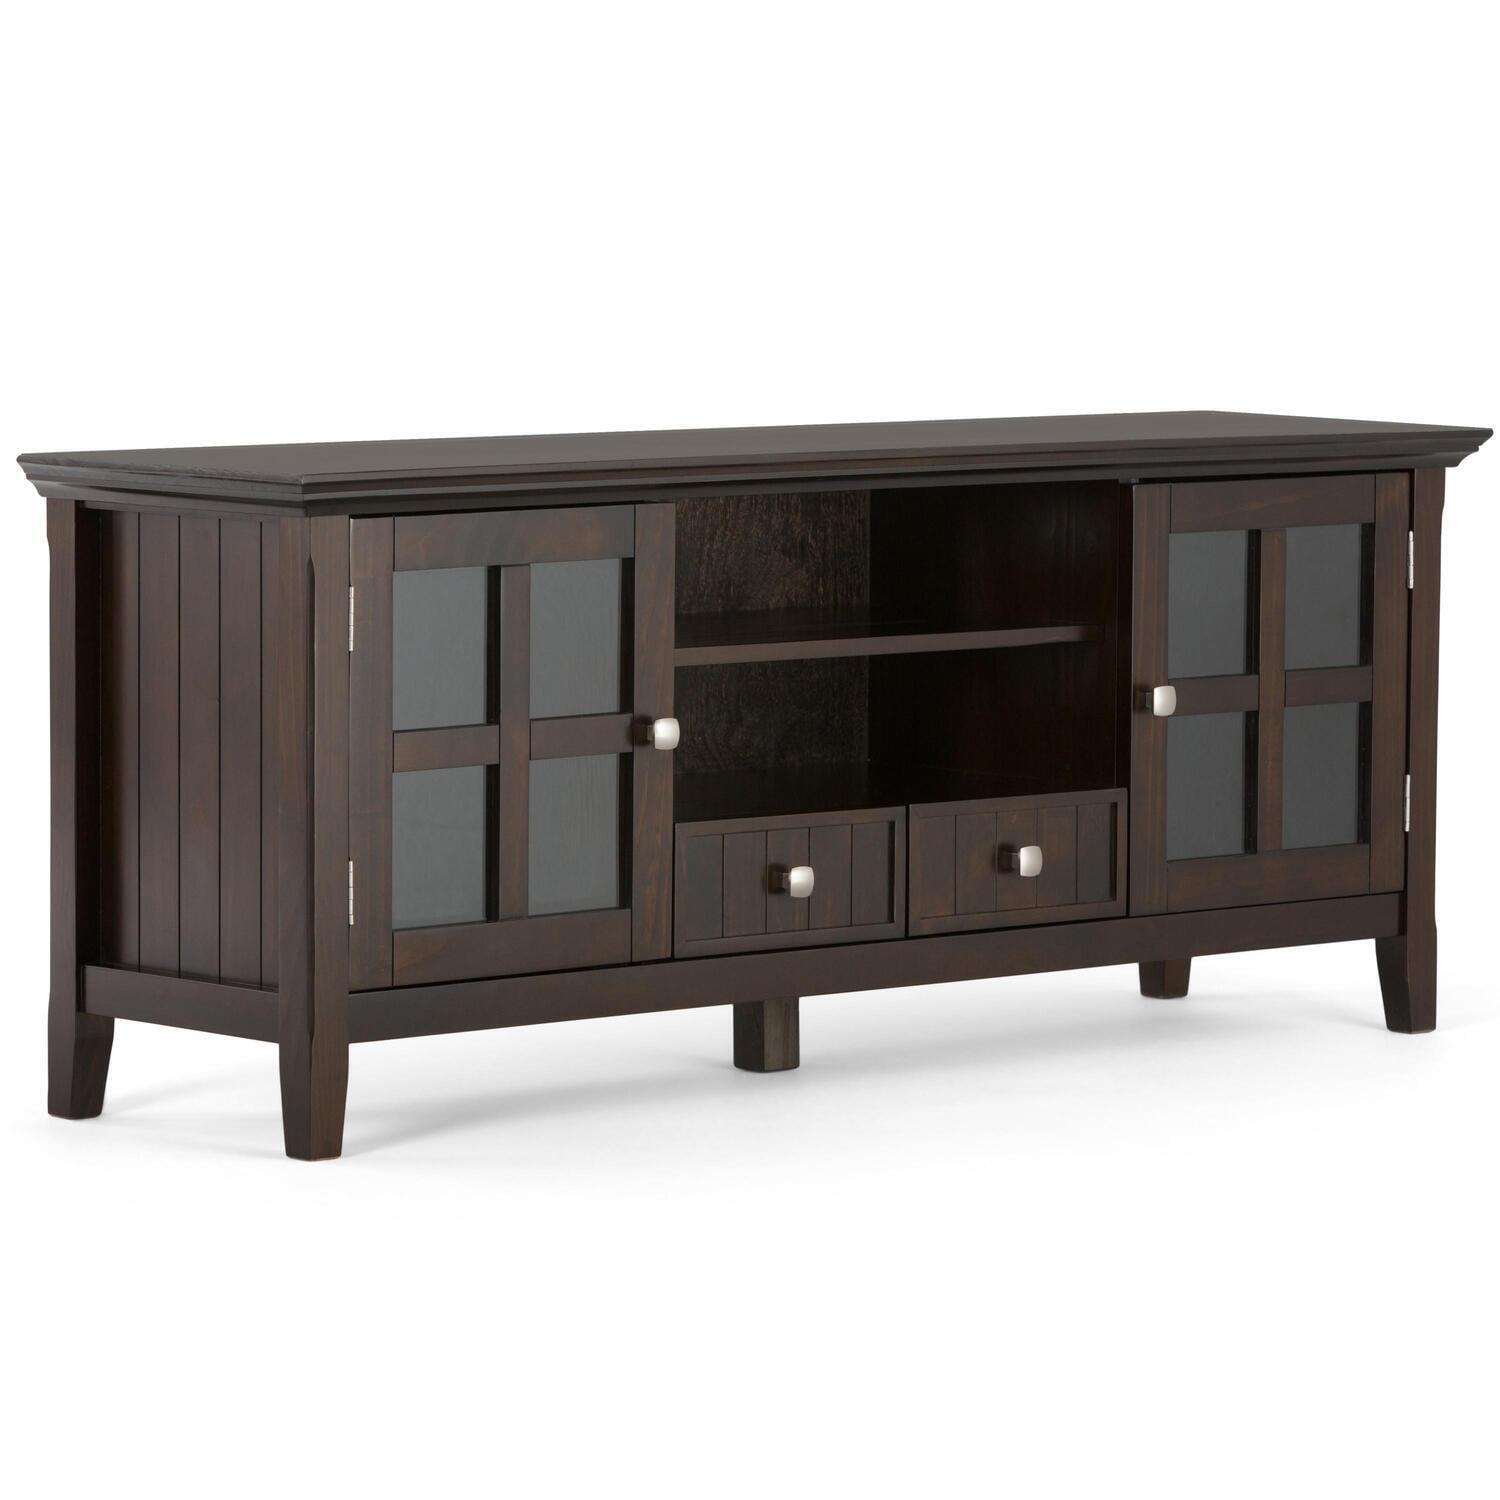 Acadian Brunette Brown Solid Wood 60" TV Media Stand with Cabinet